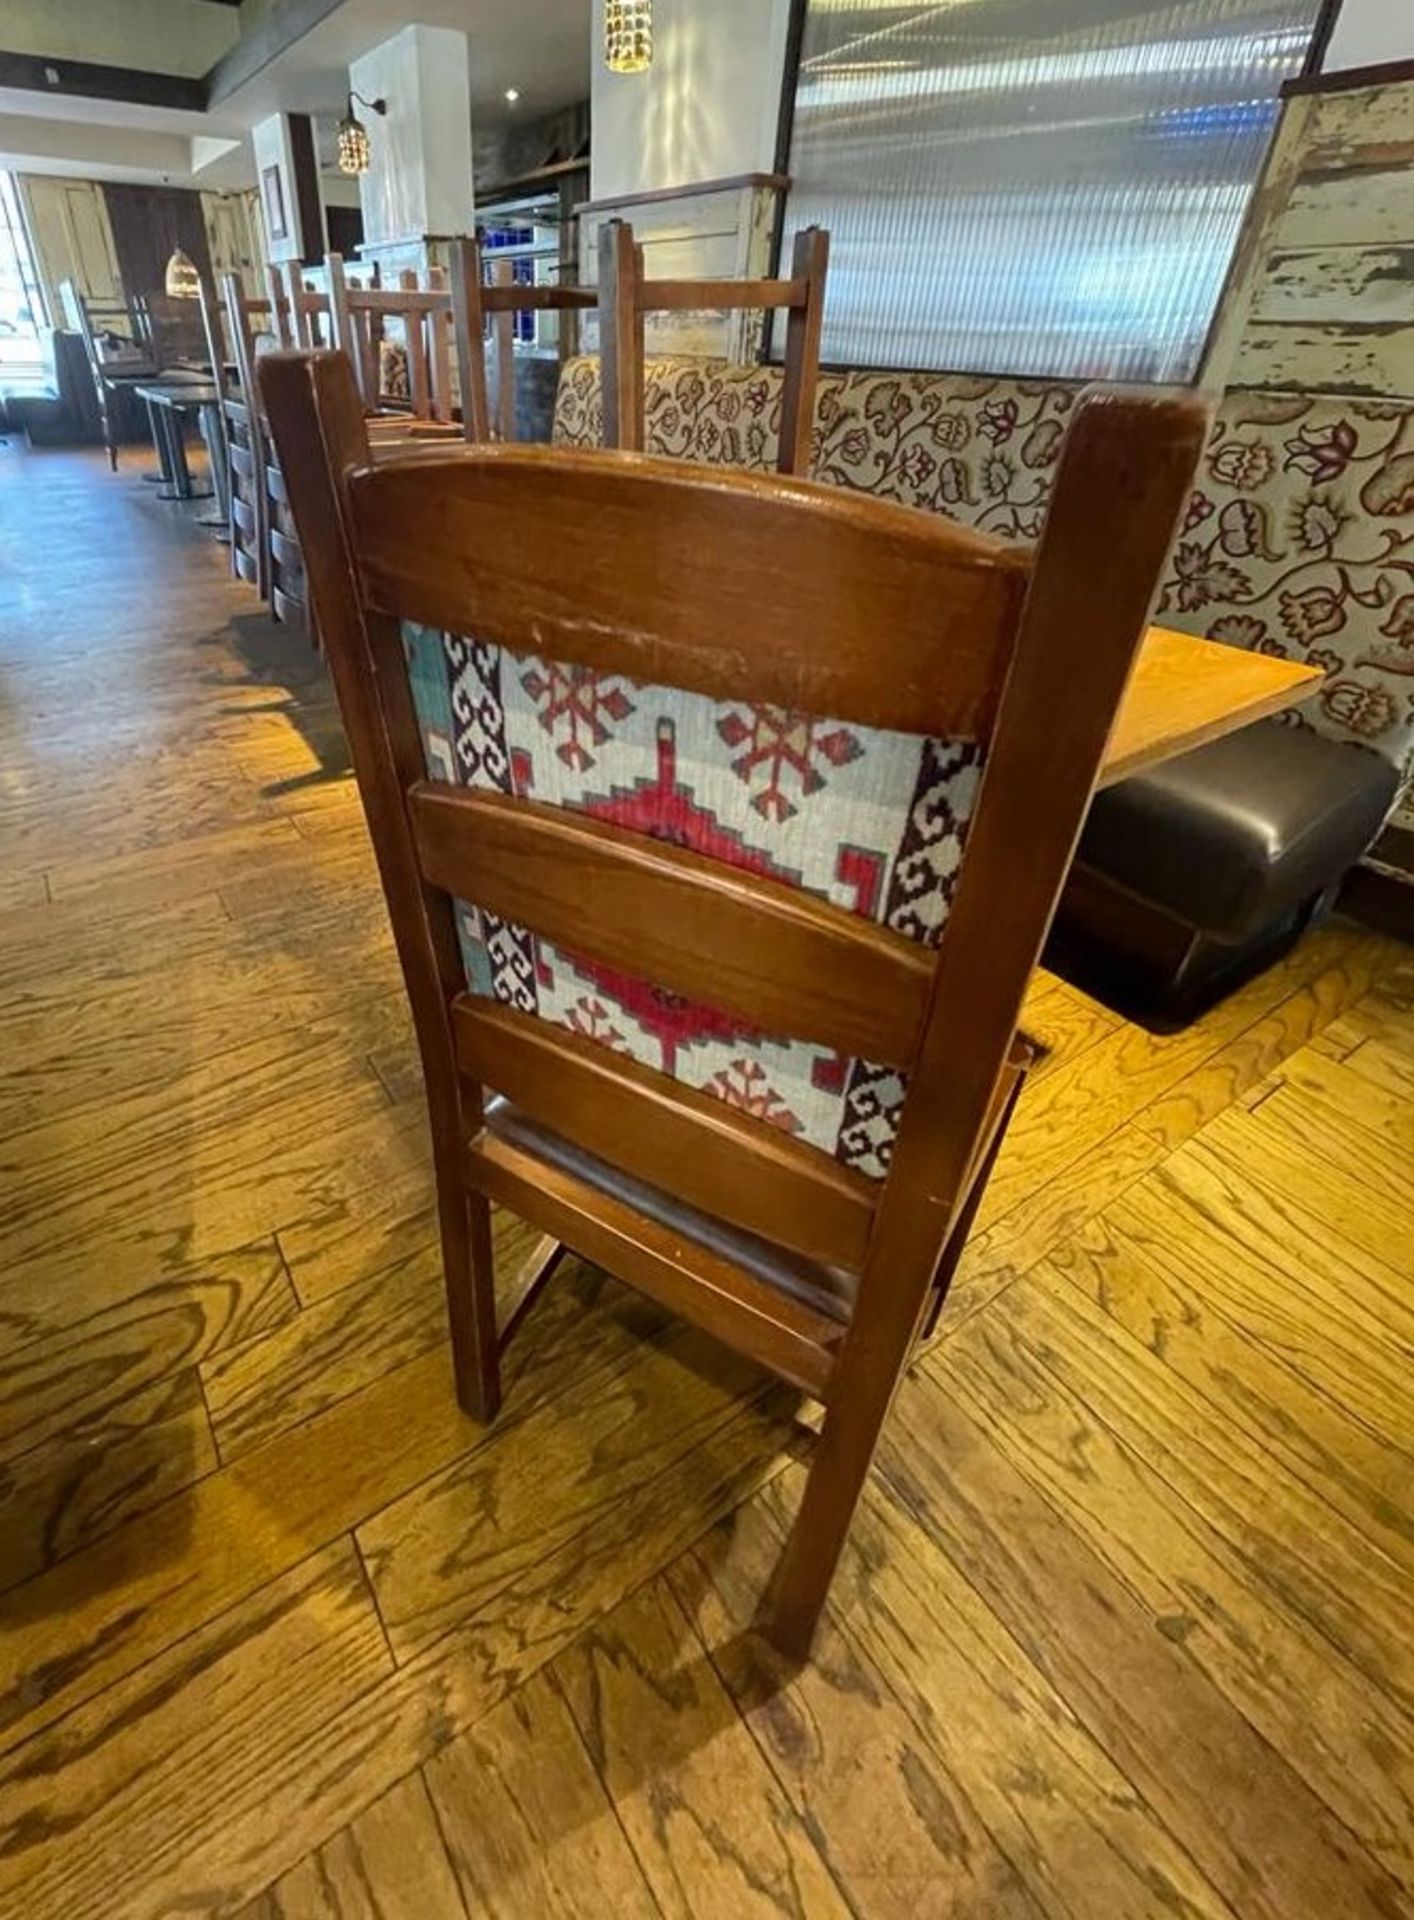 15 x High Back Dining Chairs From a Mexican Themed Restaurant - Features Wooden Frames, Brown Seat - Image 9 of 9